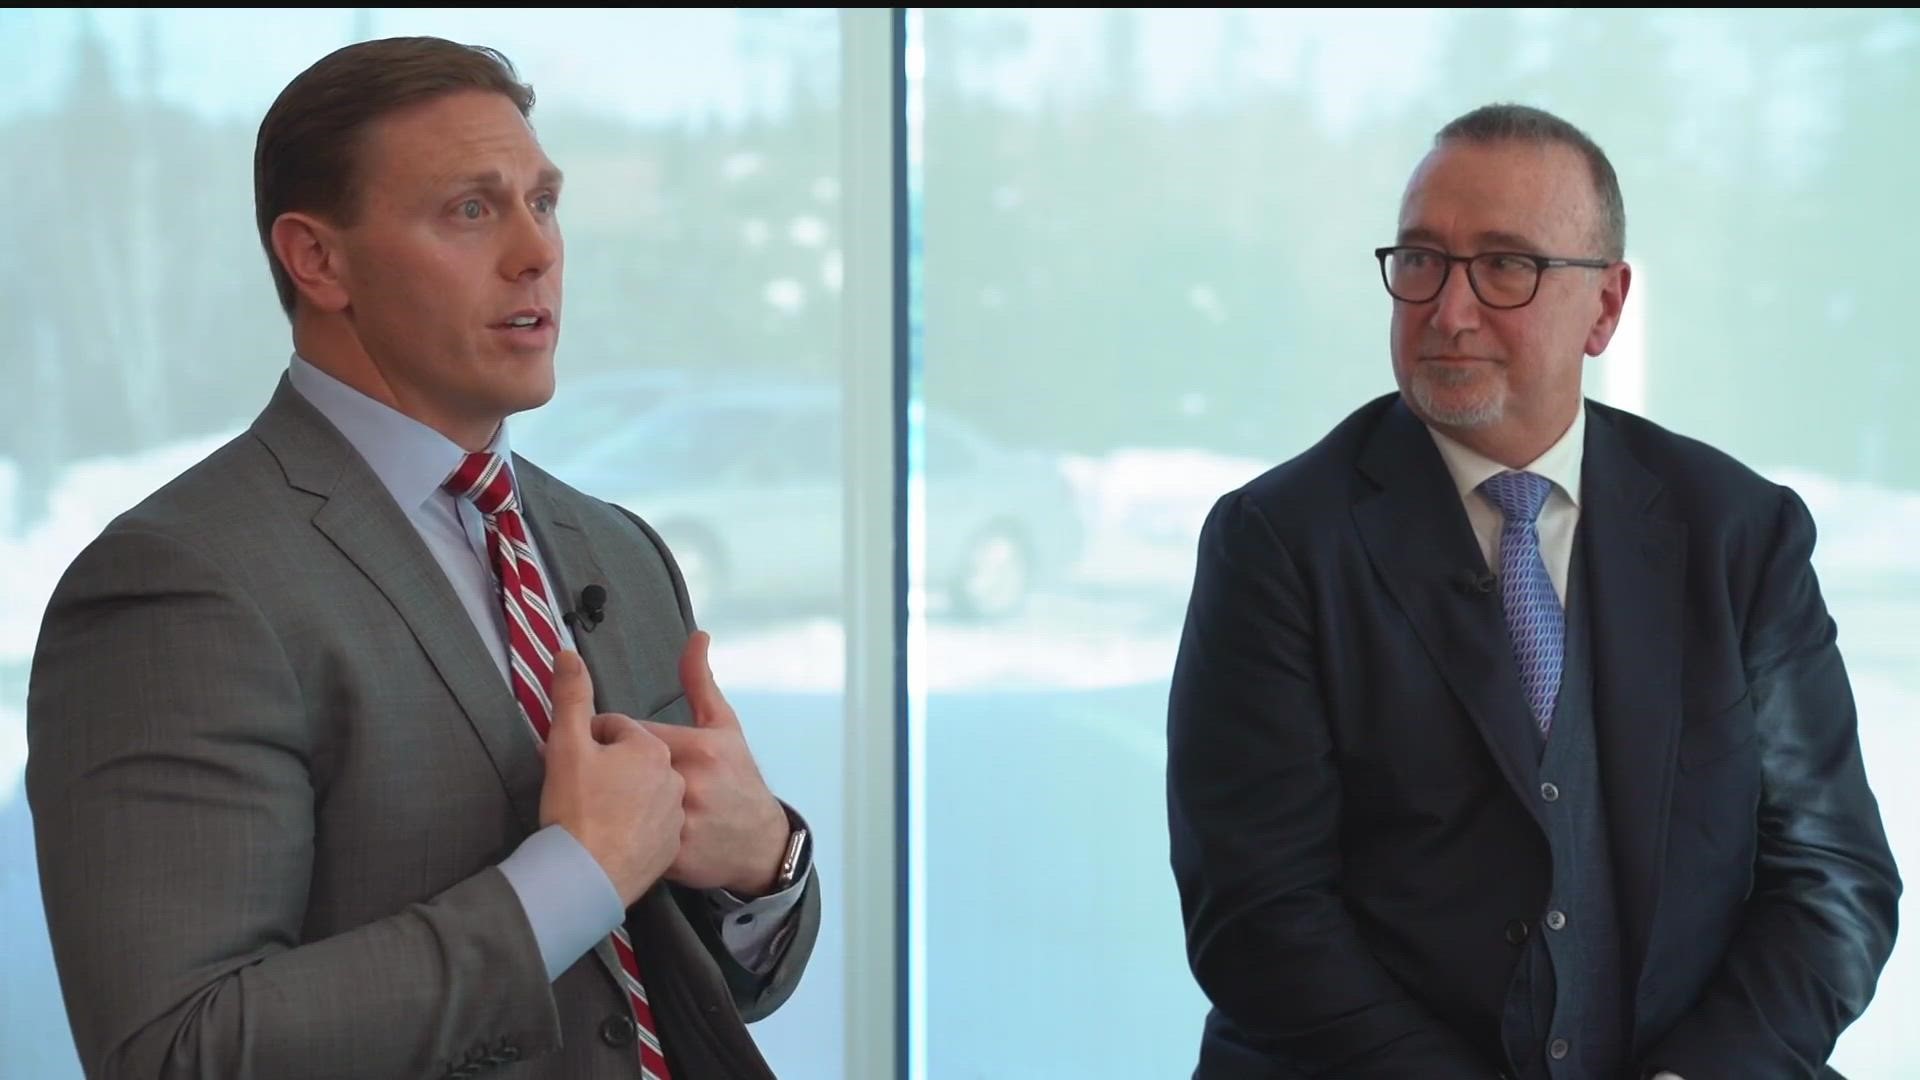 Sanford CEO Bill Gassen and Fairview CEO James Hereford spoke to KARE 11 reporter Kent Erdahl about the health care companies' impending merger.